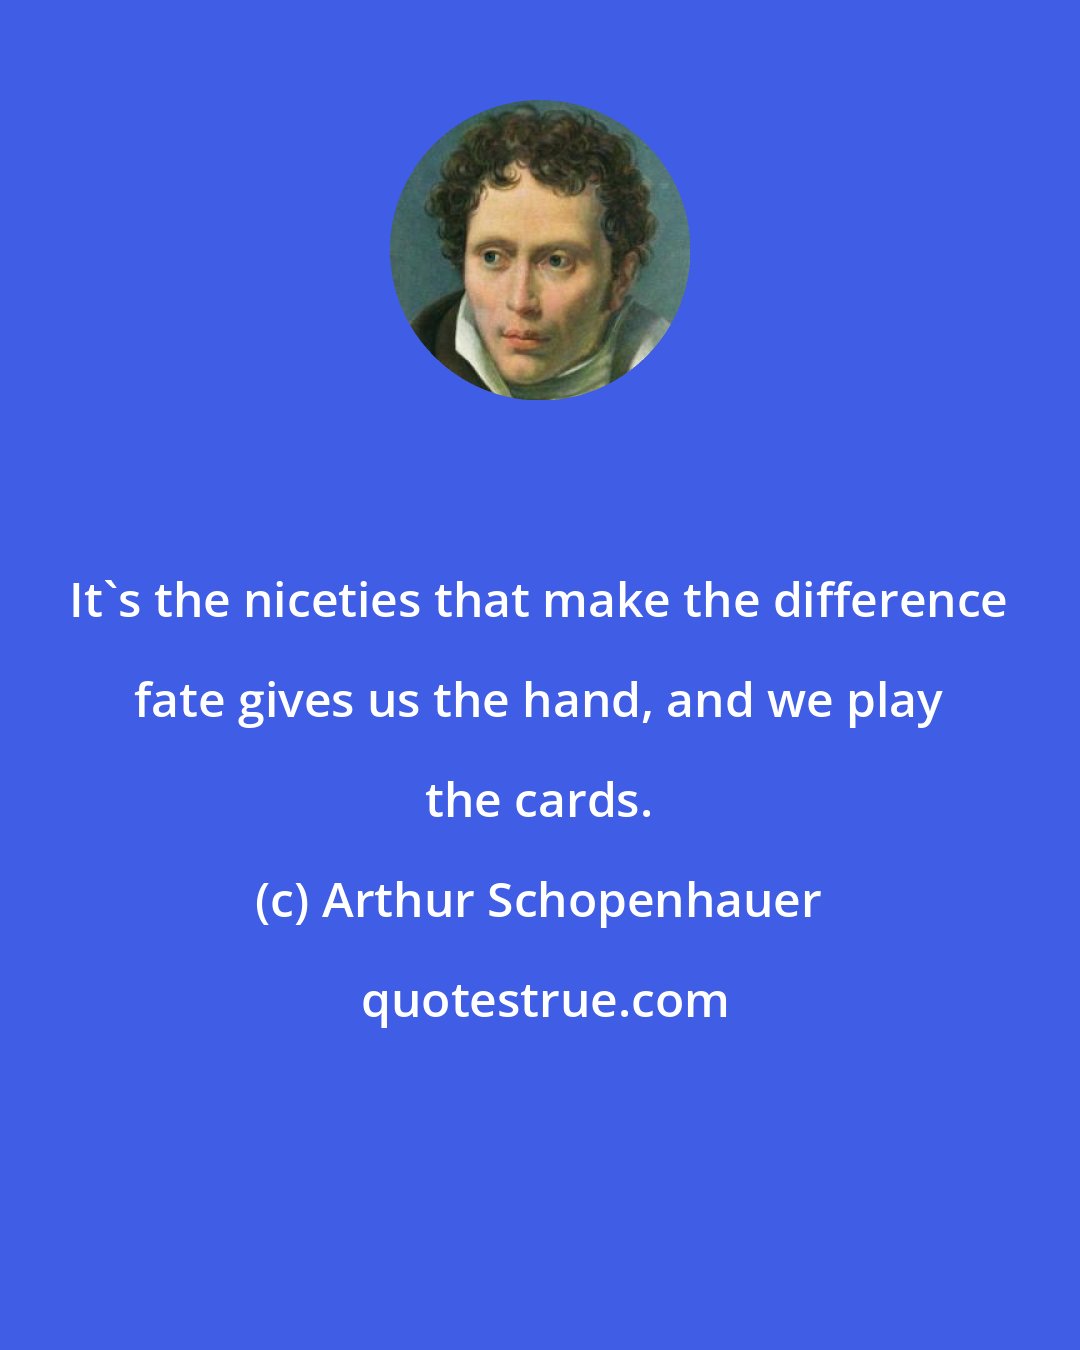 Arthur Schopenhauer: It's the niceties that make the difference fate gives us the hand, and we play the cards.